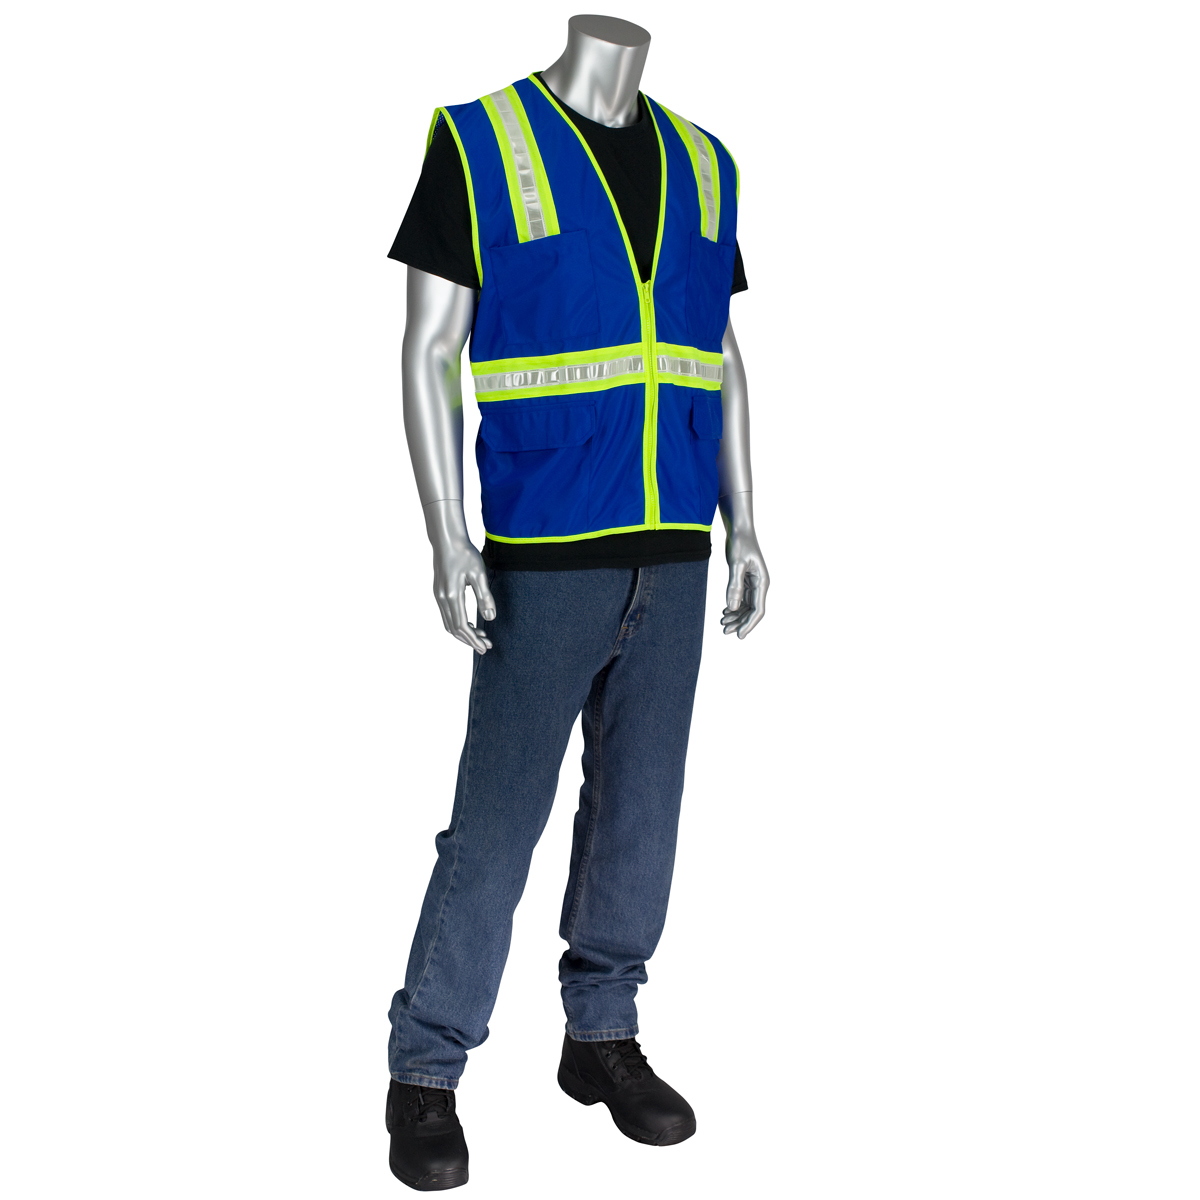 Protective Clothing, Protective Industrial Work Clothing,Safety